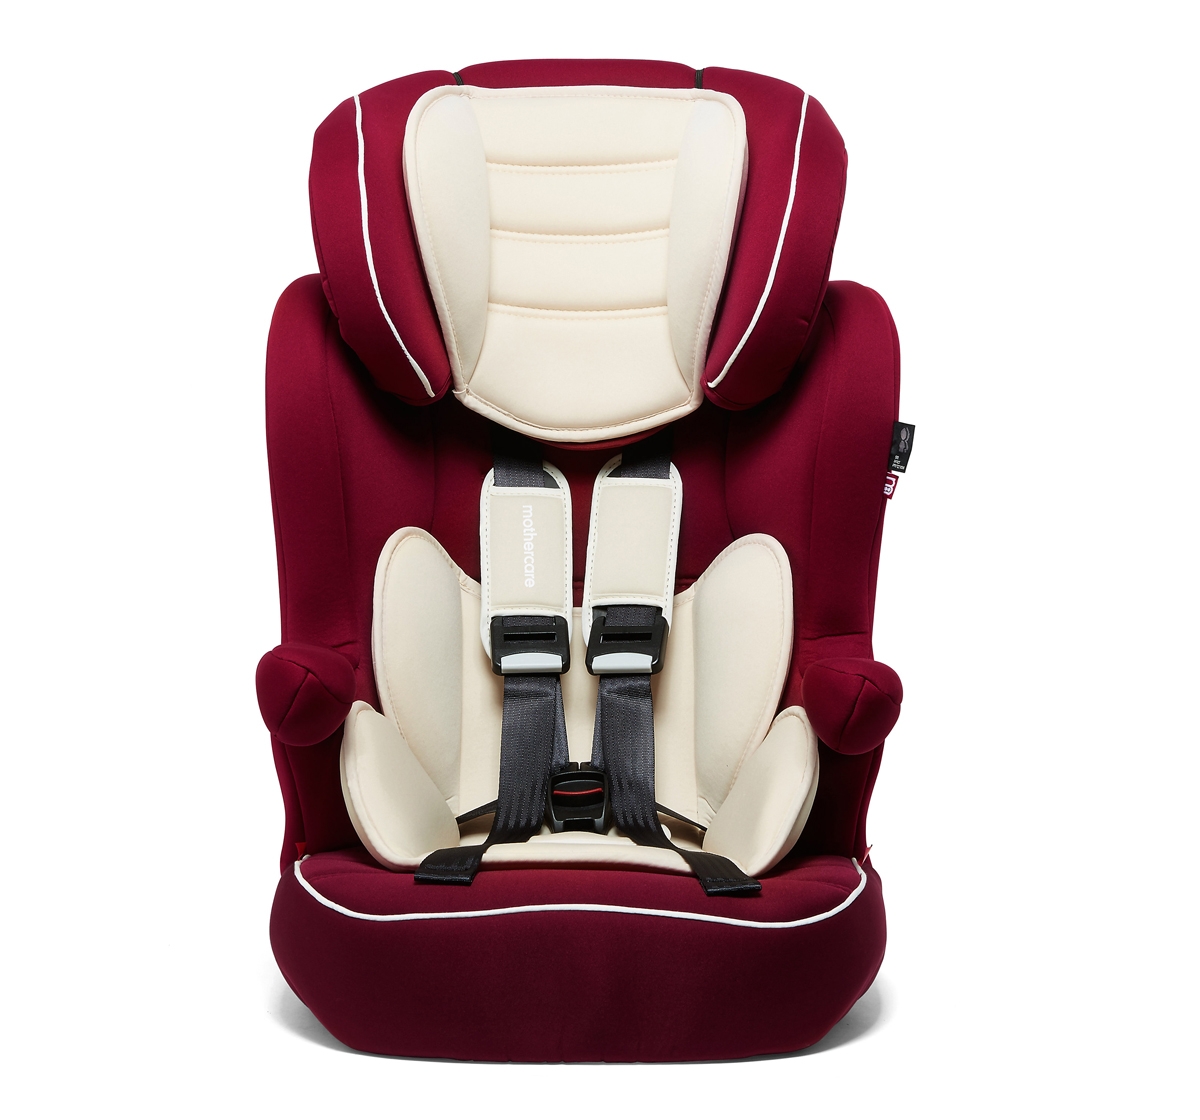 Mothercare Advance Xp Highback Booster Car Seat - Red